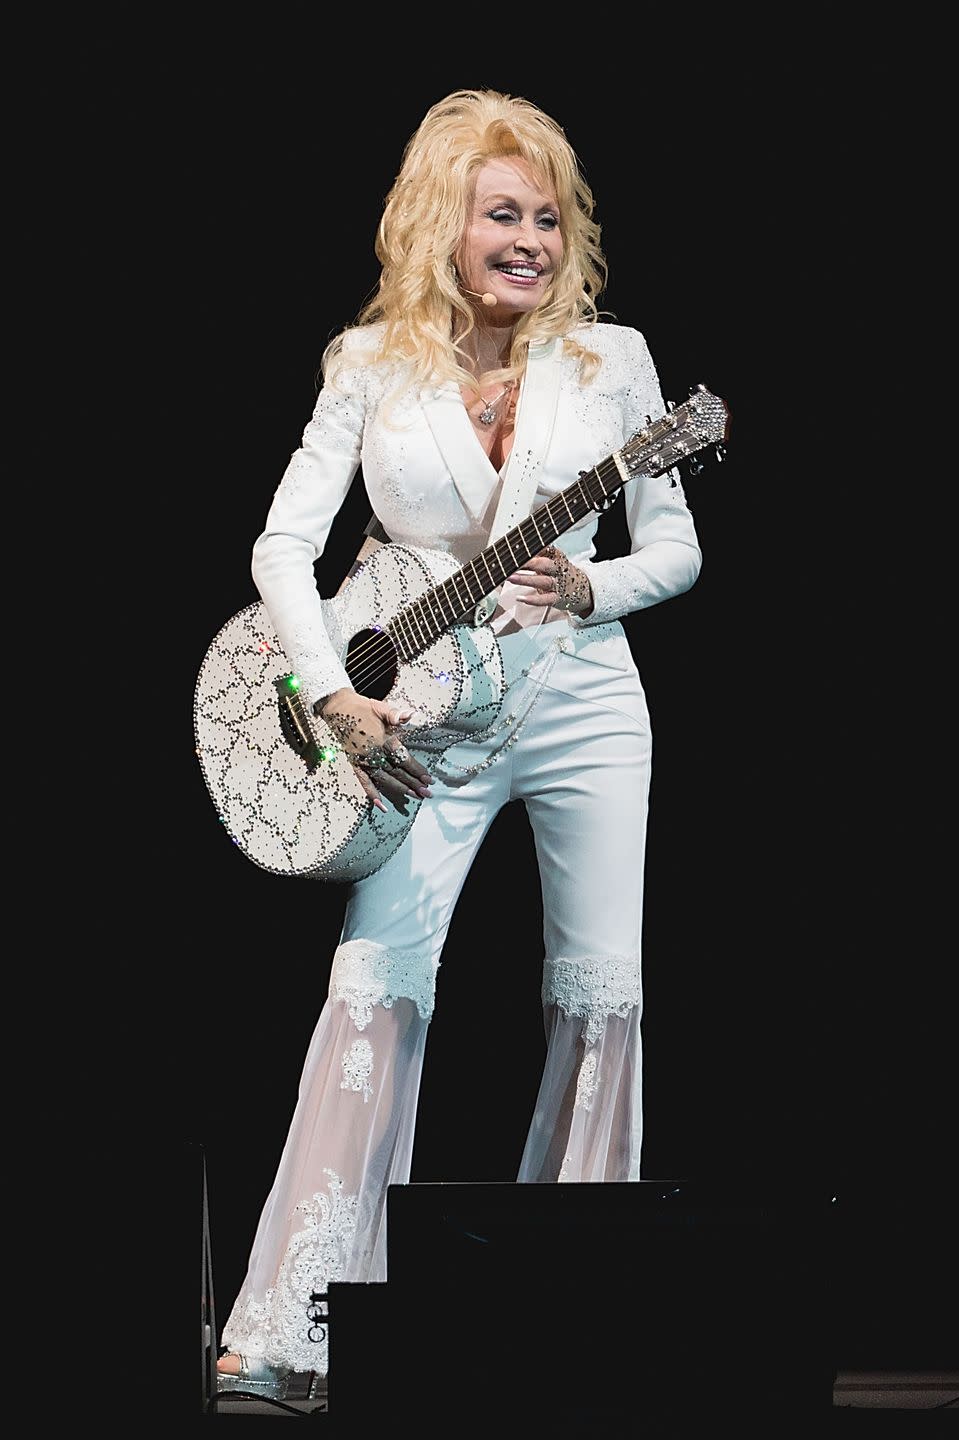 <p>Yet again reinventing the pantsuit, Parton shines in this white outfit with lace bell-bottom pants. While the singer still wears plenty of bold colors, she has gravitated back towards neutral colors again in the last two decades. </p>